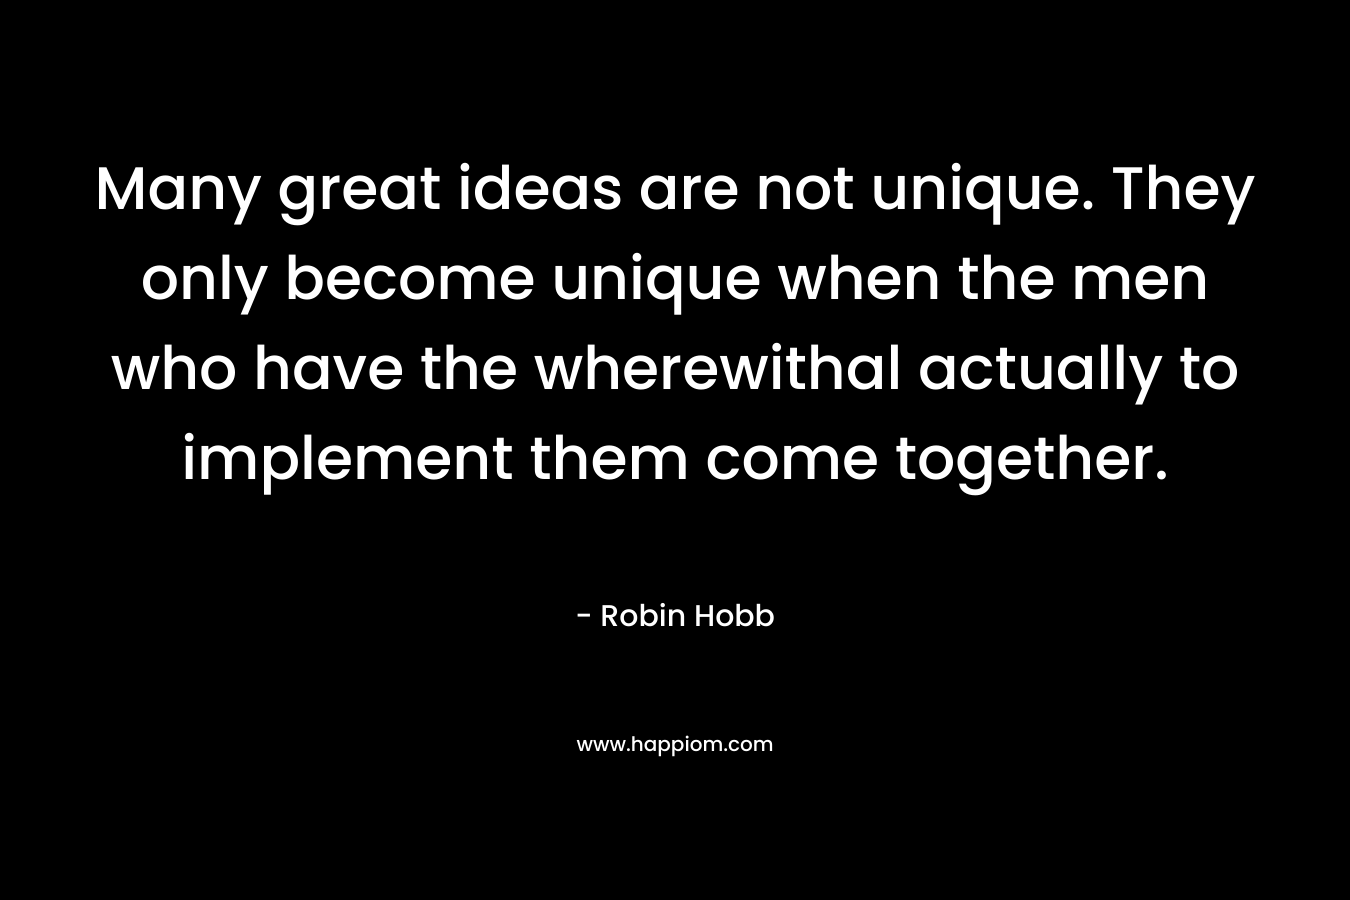 Many great ideas are not unique. They only become unique when the men who have the wherewithal actually to implement them come together.